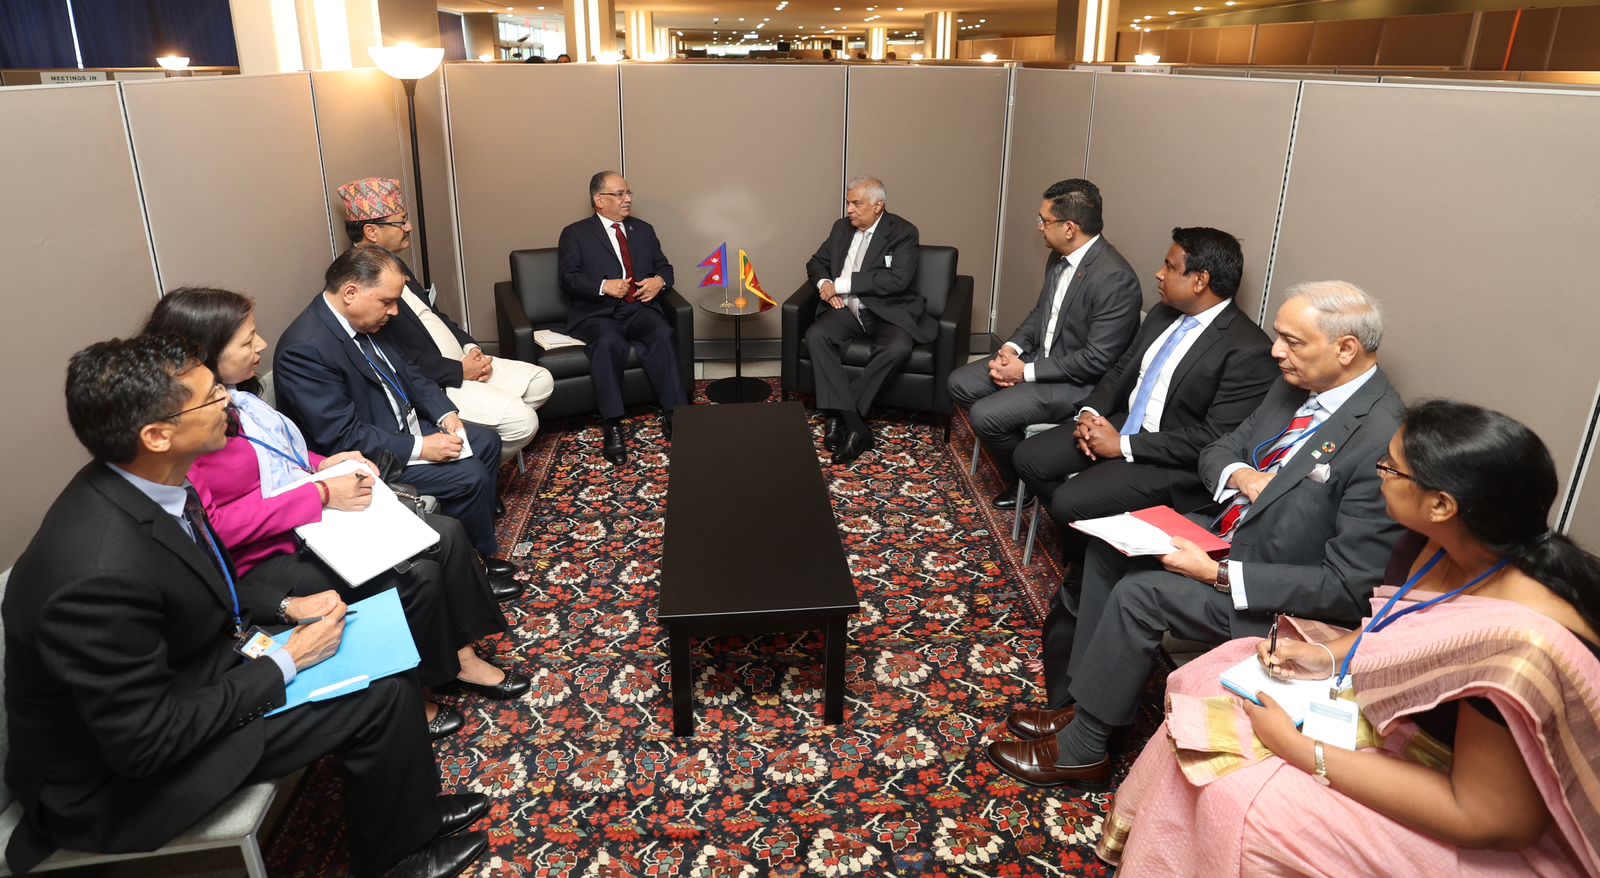 PM Dahal, Foreign Minister Saud hold meetings with leaders, UN officials on the sidelines of UNGA